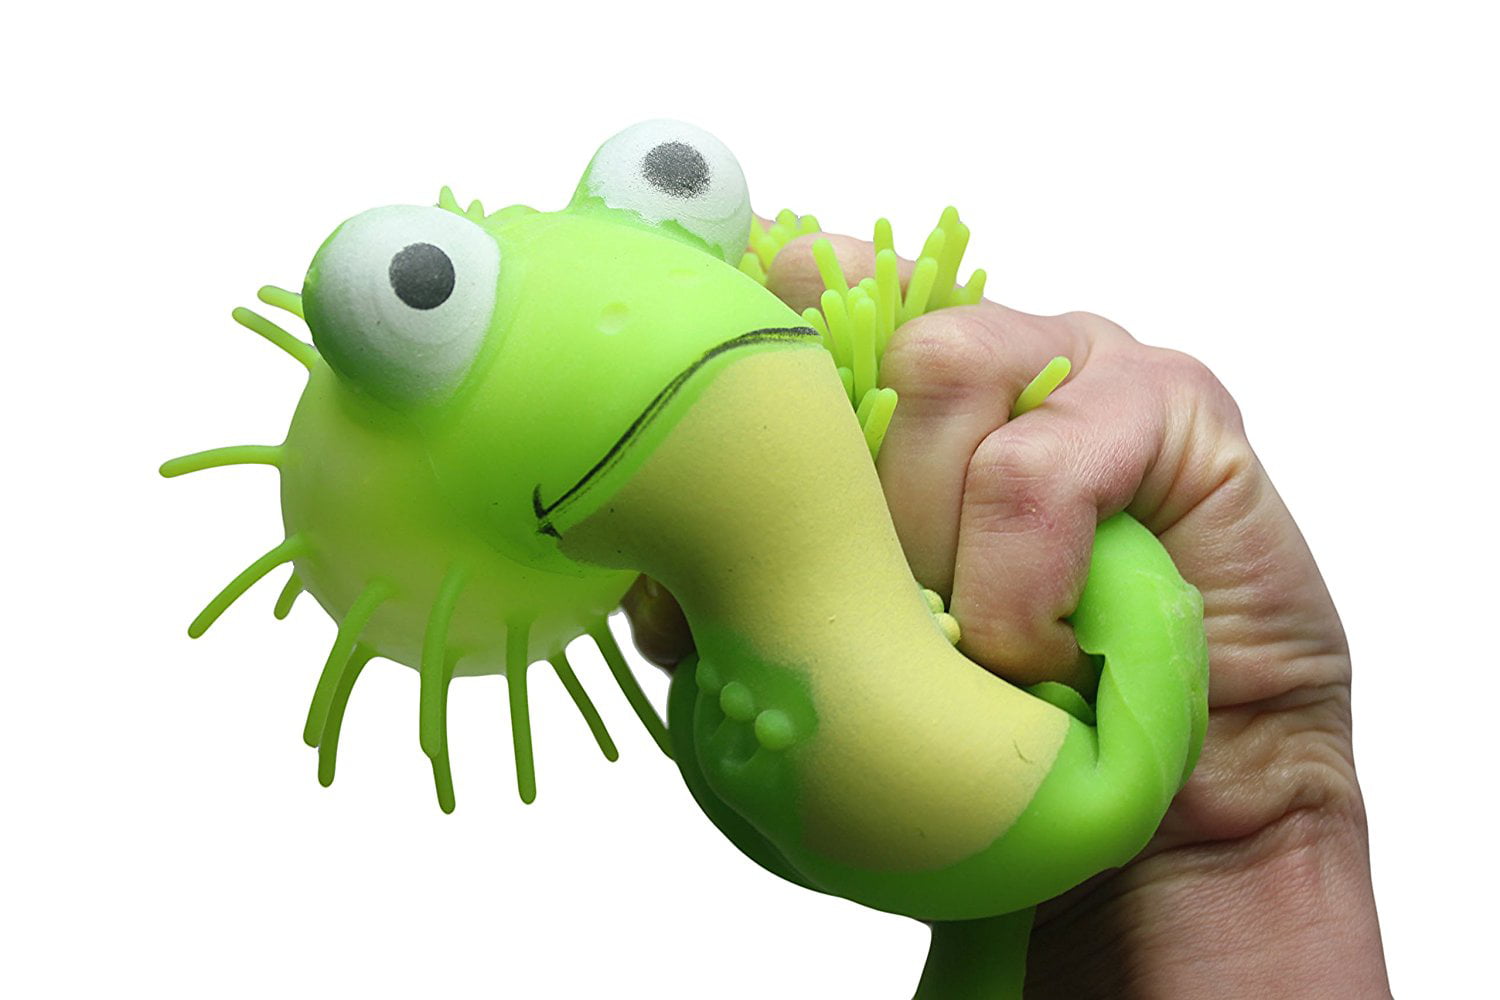 Squishy Spike Frog: Mini Puffer Frog with Soft Rubber Spikes